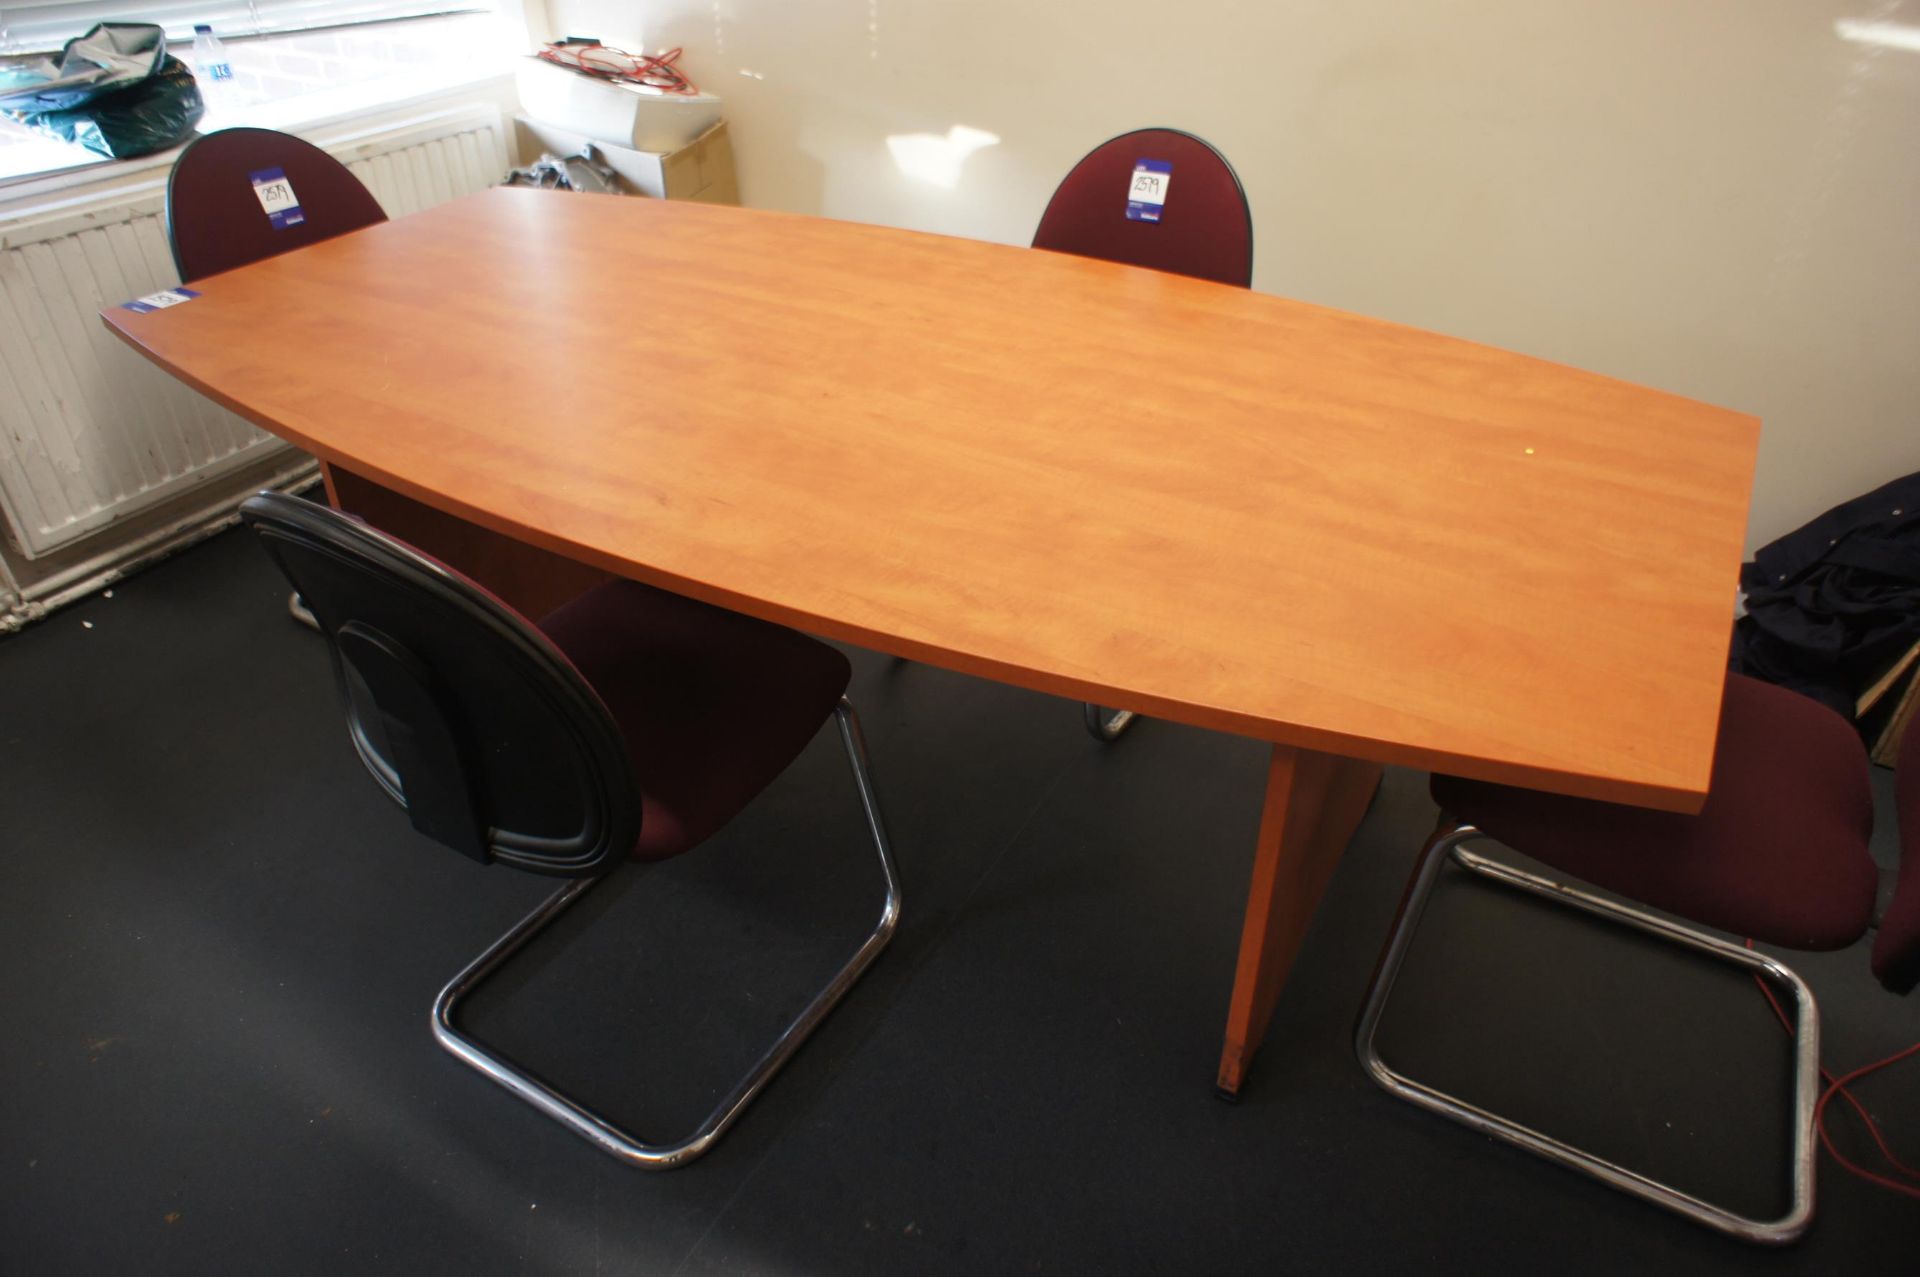 Cherry Effect Shaped Meeting Room Table 2200 x 1100 with 4 Upholstered Chairs - Image 2 of 3